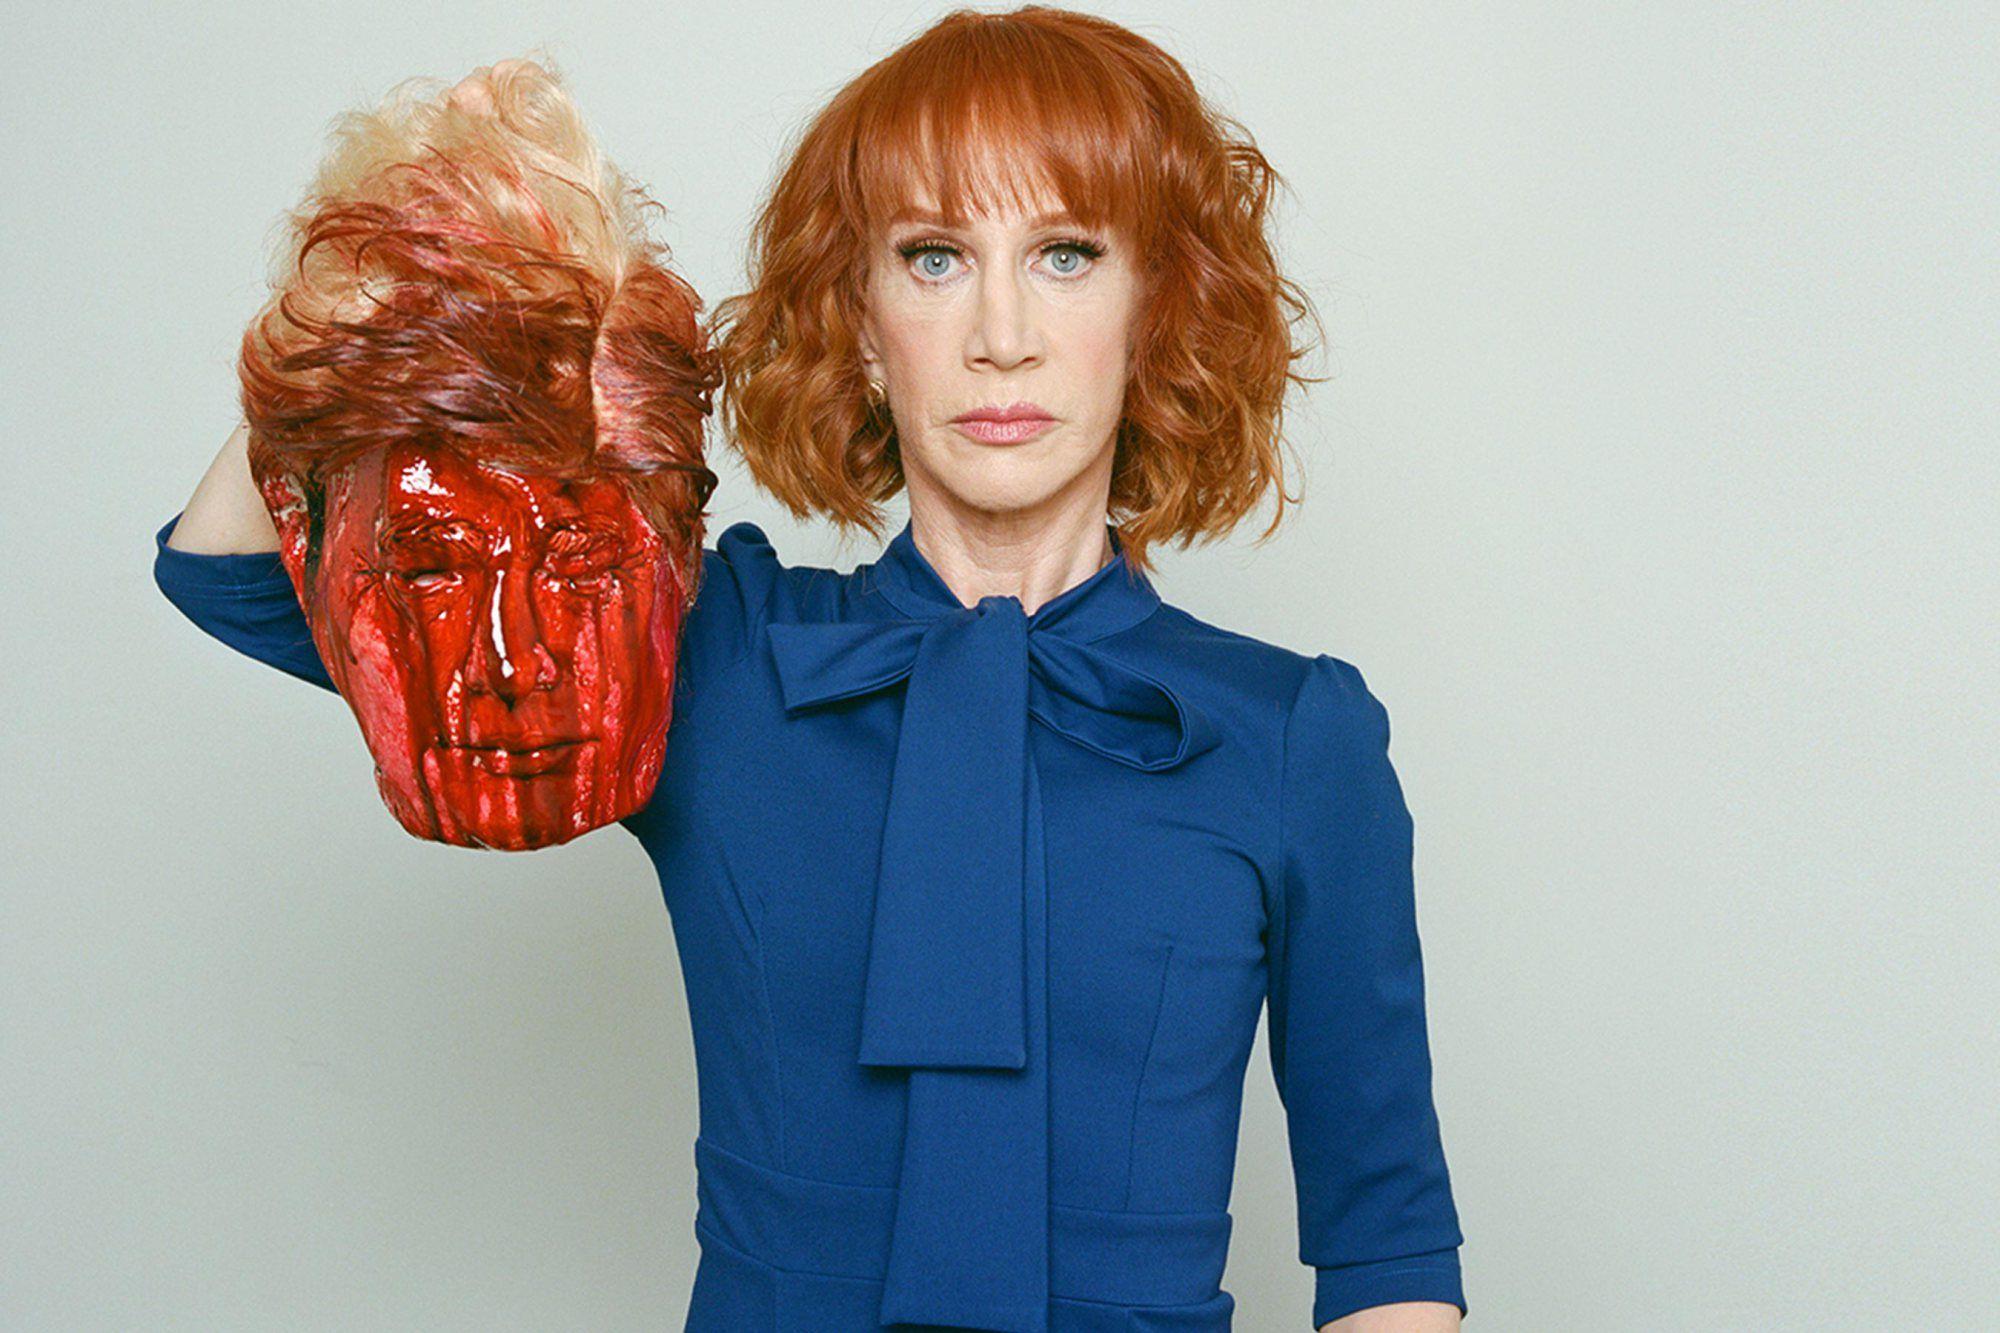 List of Democrats who took money from violent sicko Kathy Griffin